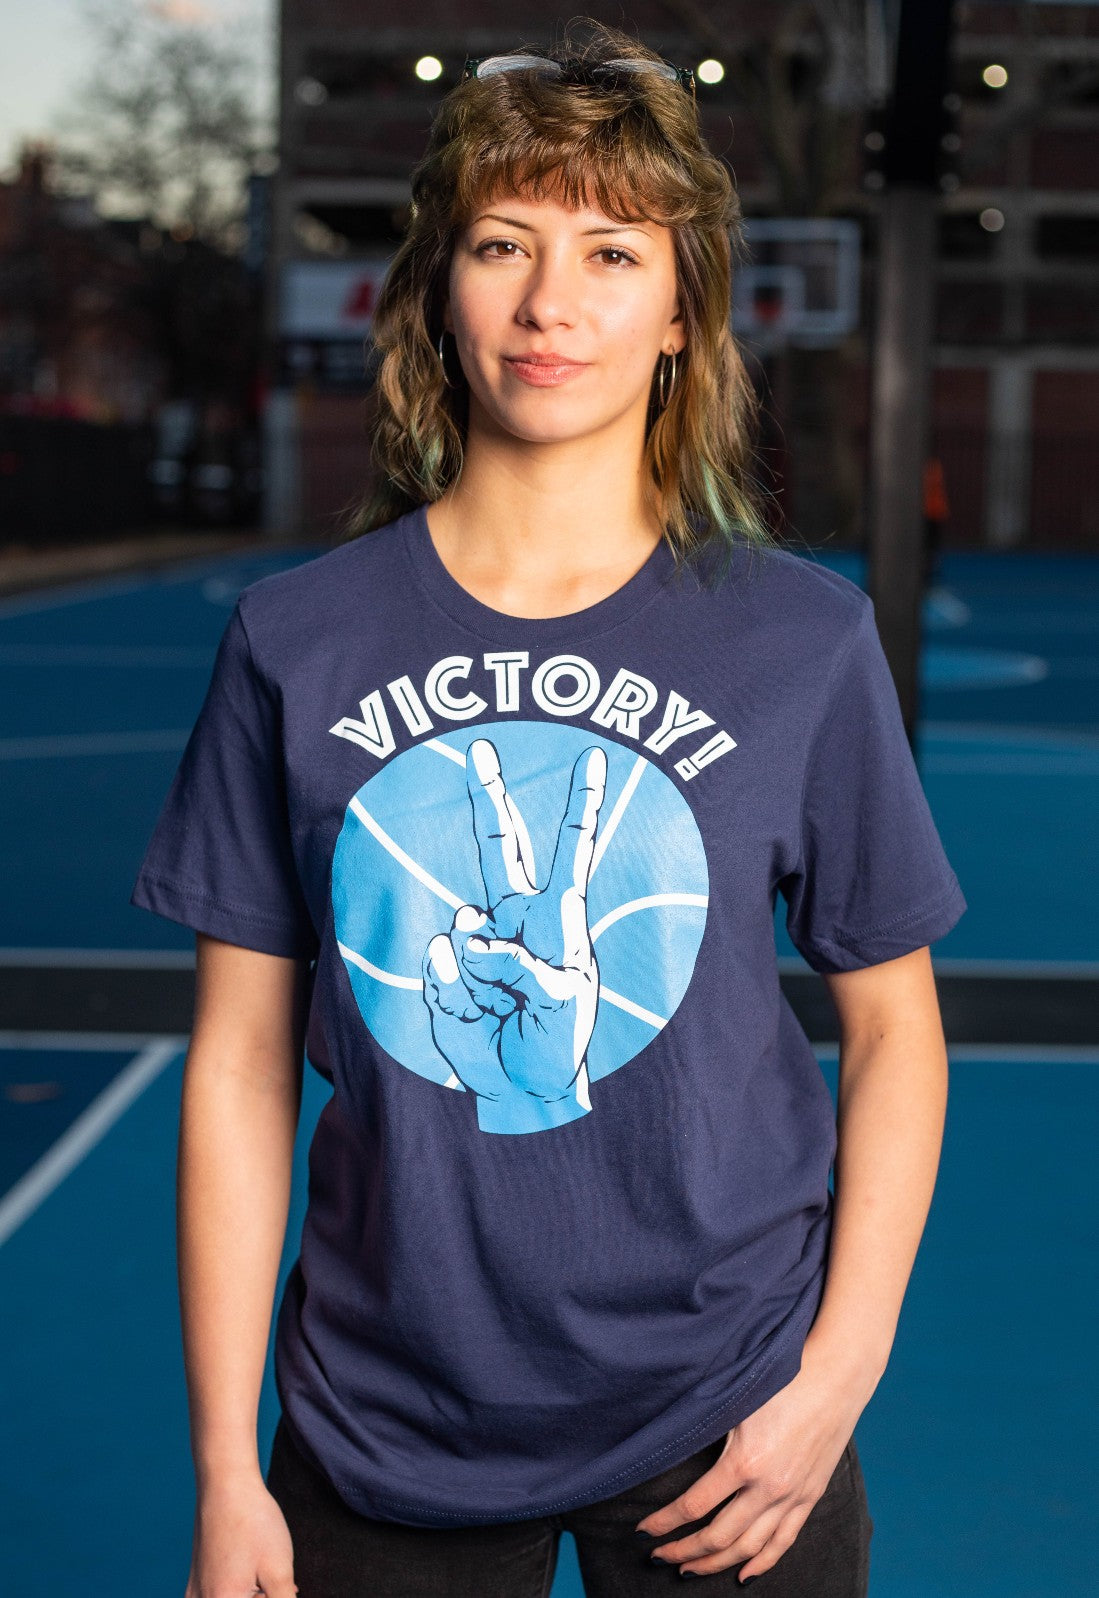 Wildcats V for VICTORY! T-shirt